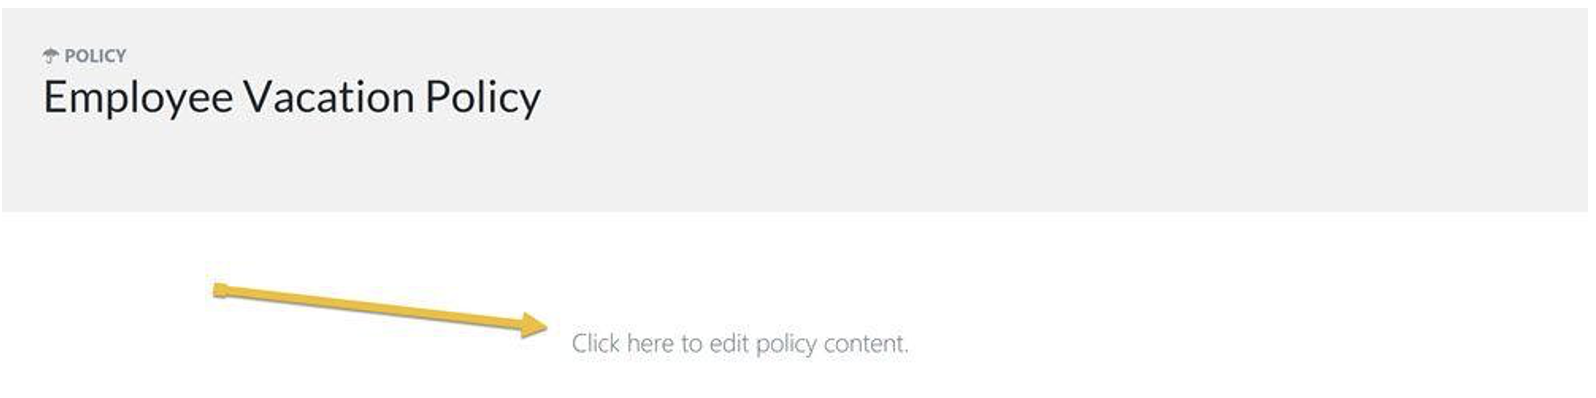 “Click here to edit policy content” to add relevant content to the policy